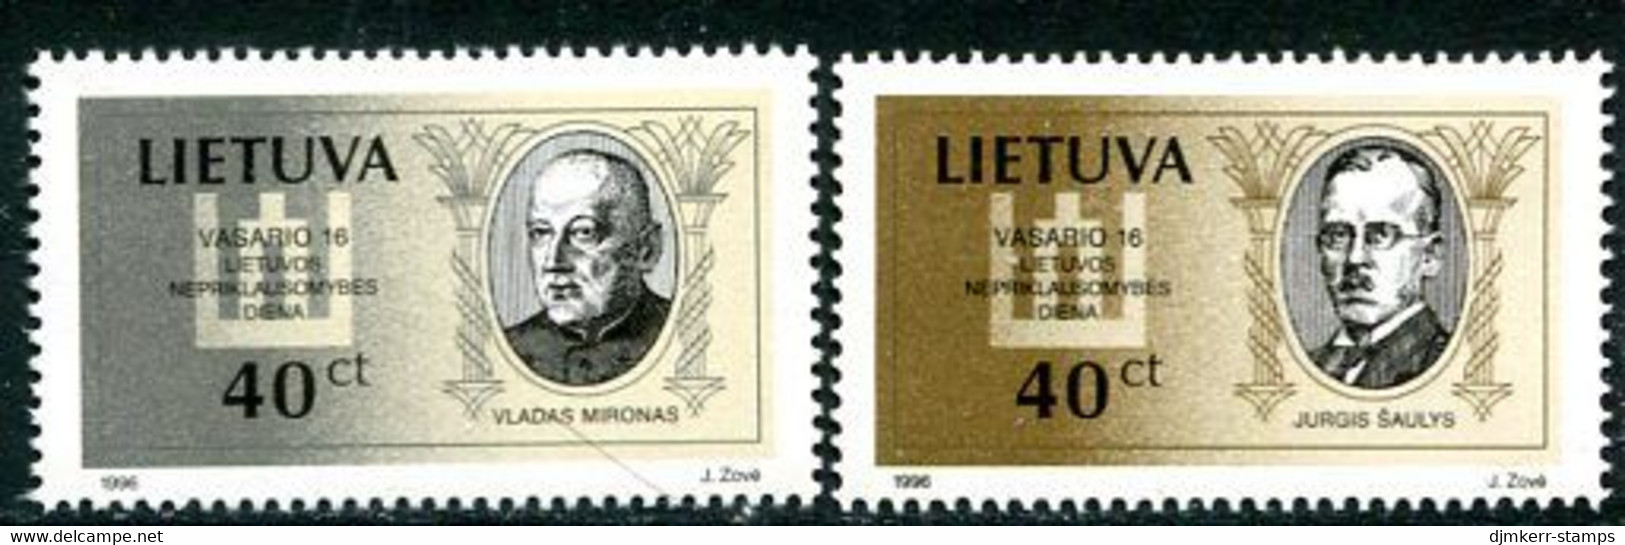 LITHUANIA 1996 Independence Day MNH / **.  Michel 606-07 - Lituania